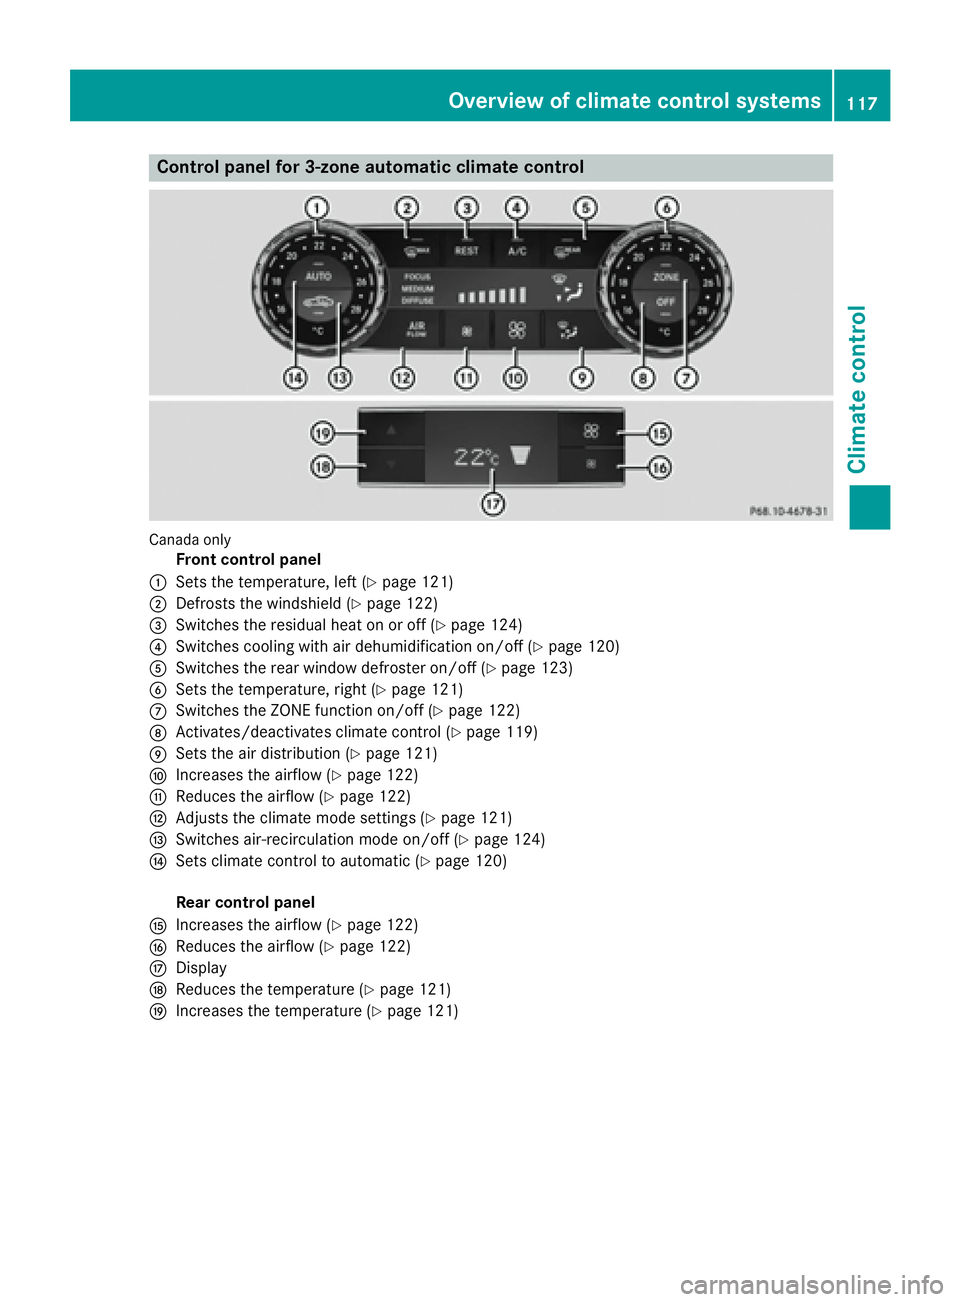 MERCEDES-BENZ CLS 2016  Owners Manual Control panel for 3-zone automatic climate control
Canad a only
Front control panel�C
Sets the temperature, left ( Y
page 121)�D
Defrosts the windshield ( Y
page 122)�